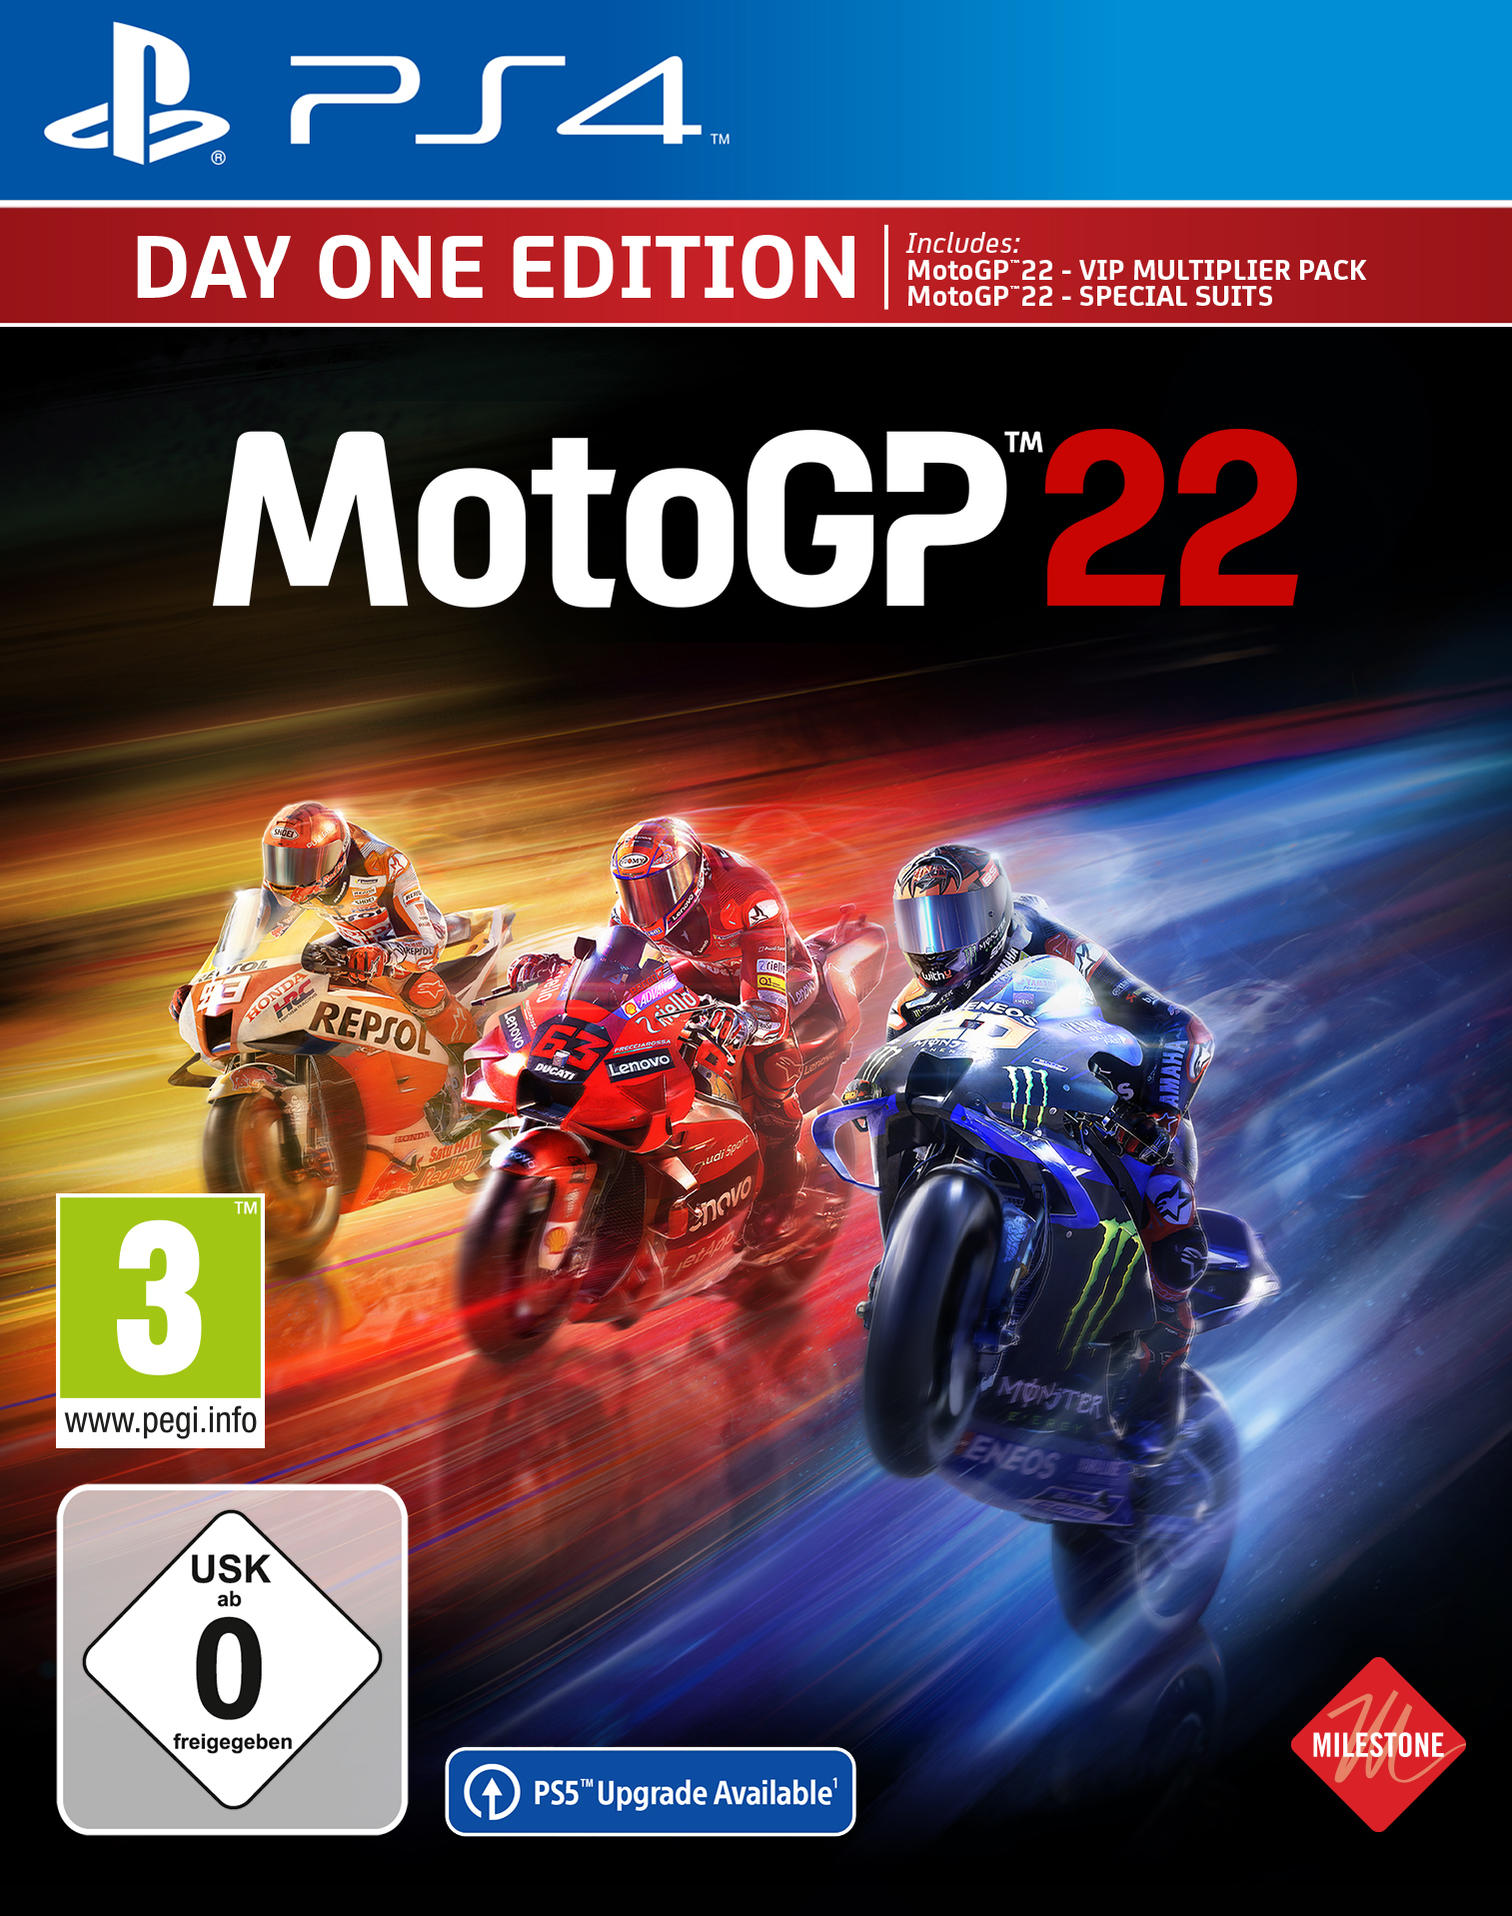 PS4 4] MOTOGP - 22 EDITION DAY ONE [PlayStation